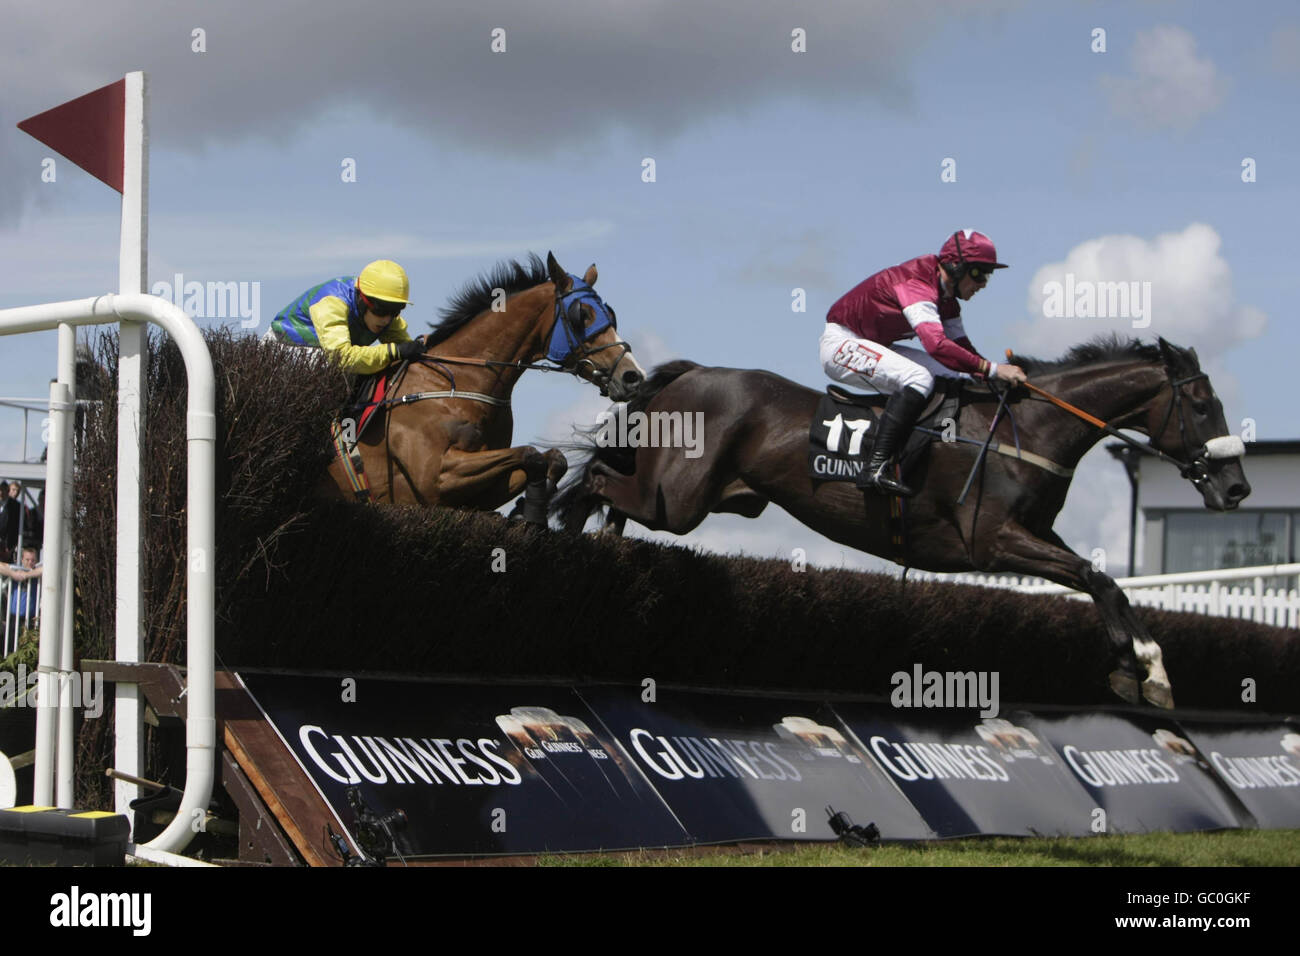 Horse Racing - Galway-Sommerfest - Tag vier - Galway Stockfoto